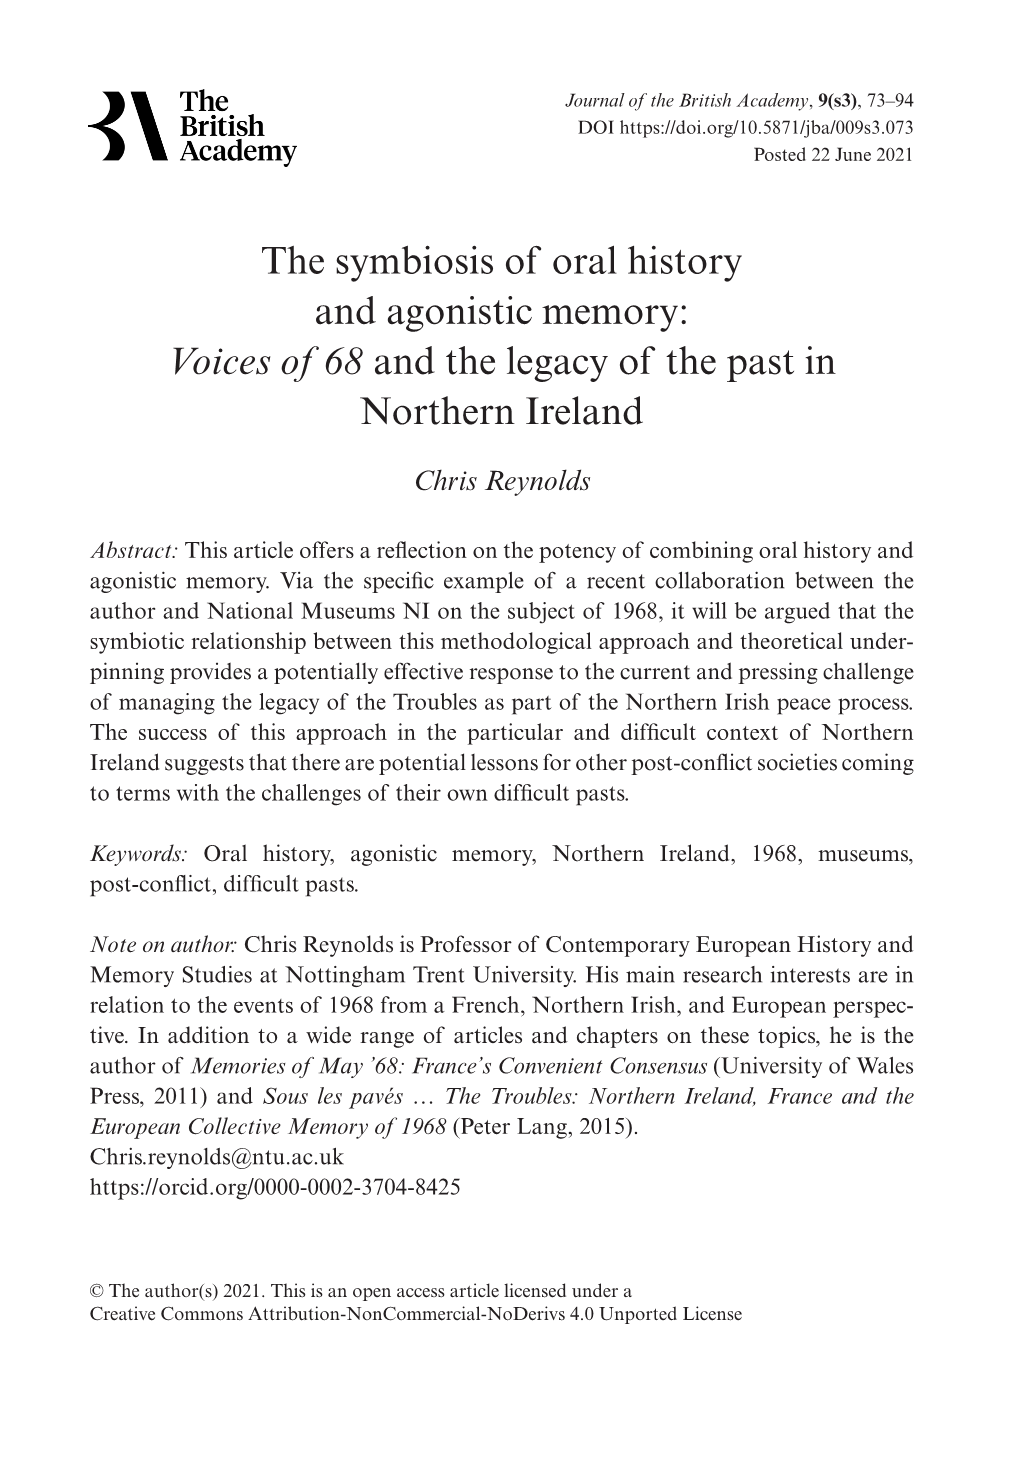 The Symbiosis of Oral History and Agonistic Memory: Voices of 68 and the Legacy of the Past in Northern Ireland